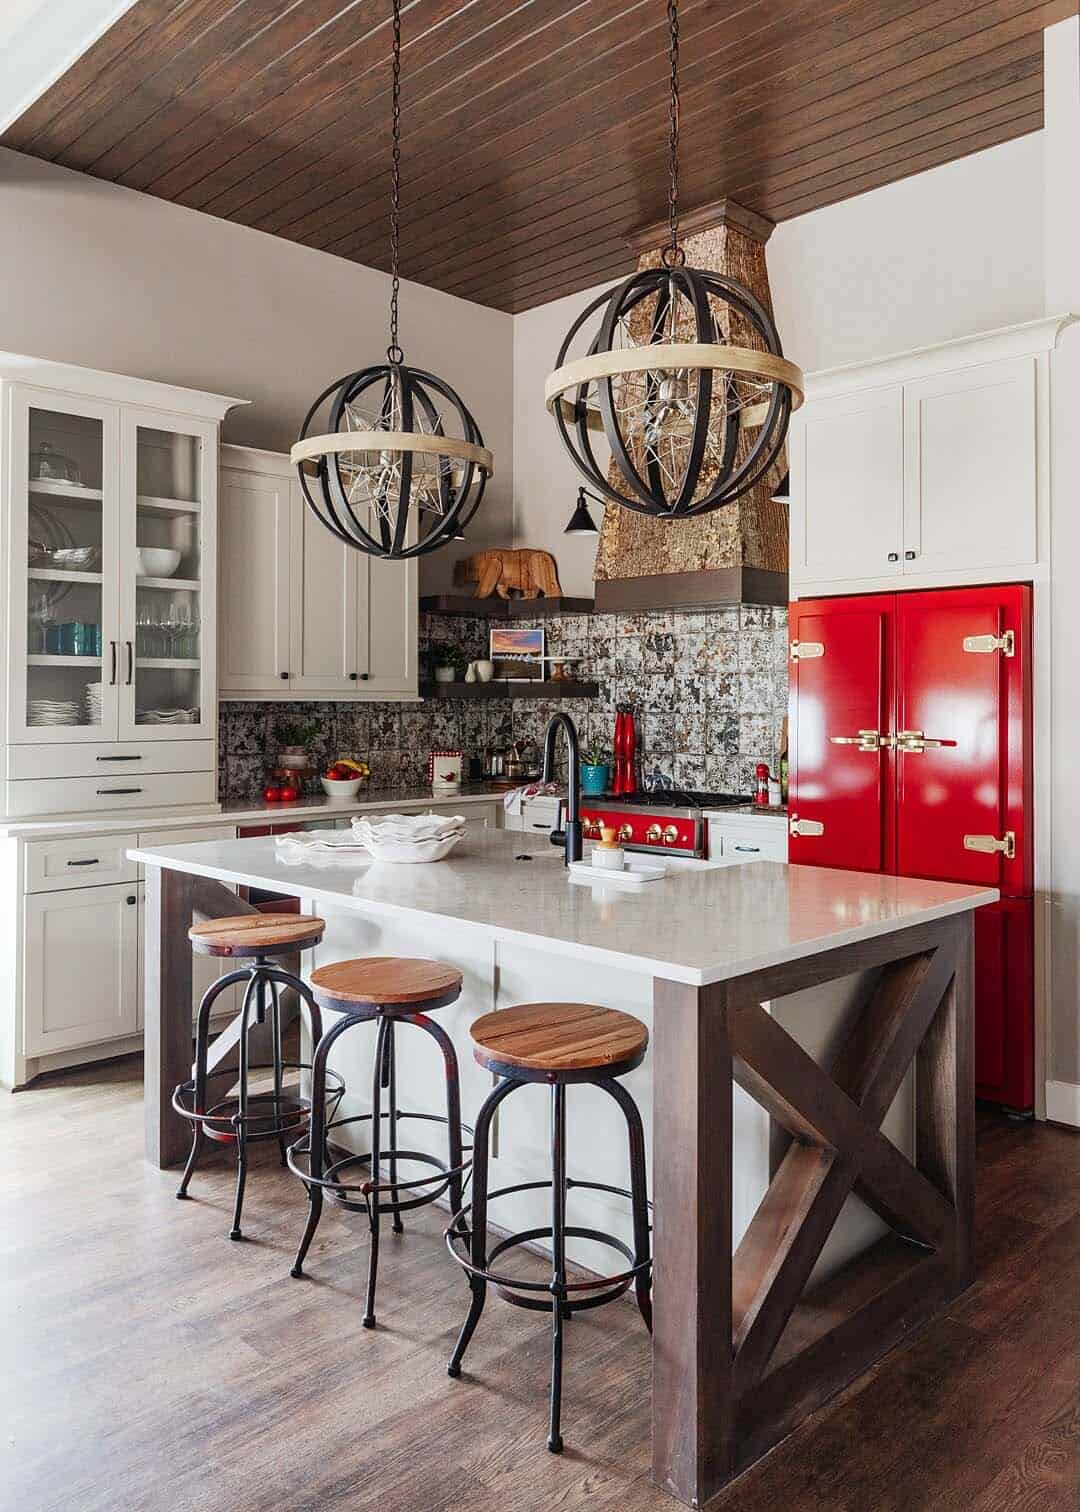 rustic kitchen with a red retro fridge and large pendant lights over the island